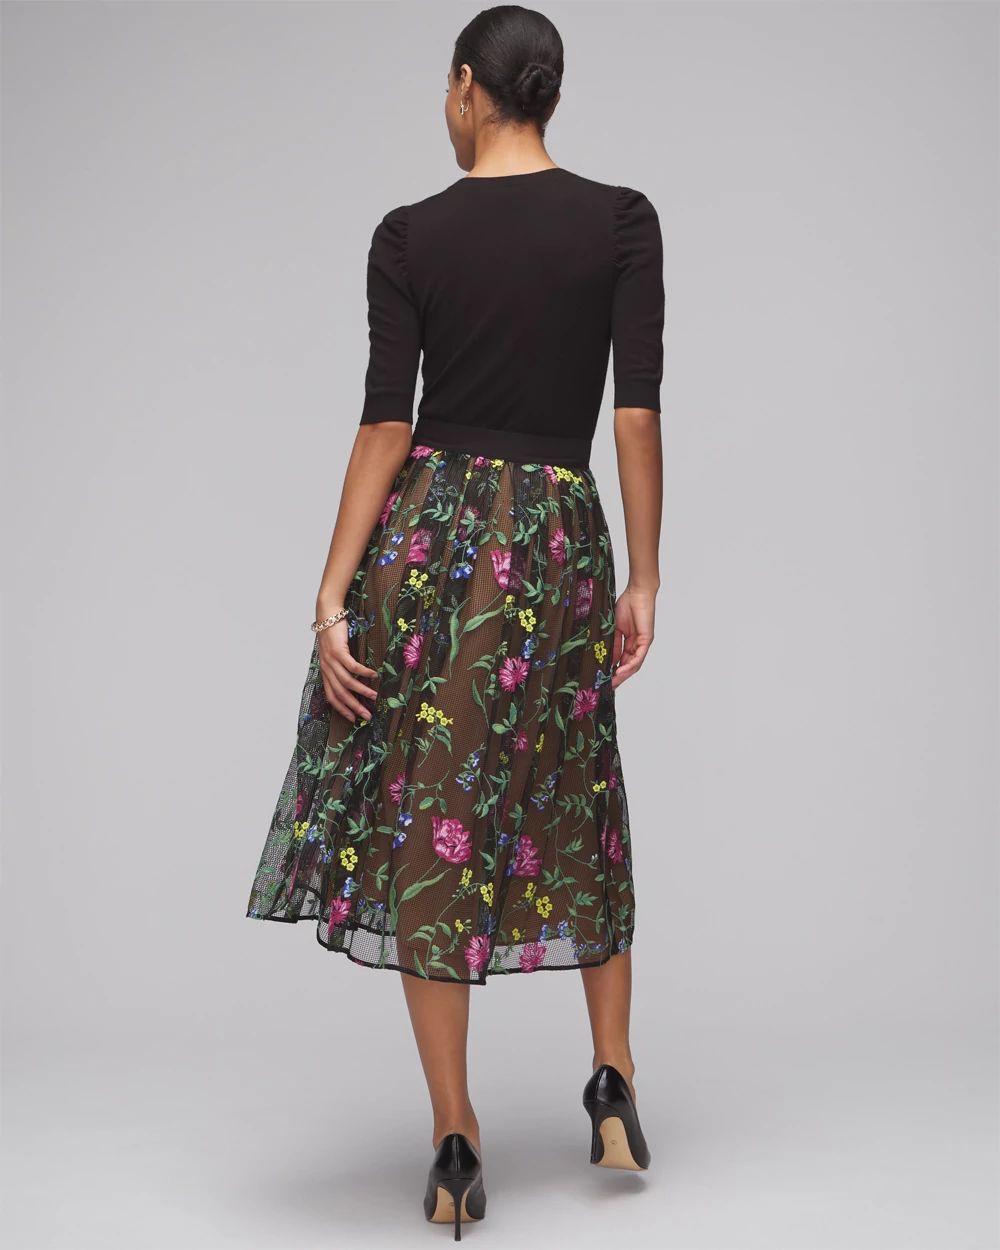 Petite Embroidered Fit & Flare Skirt